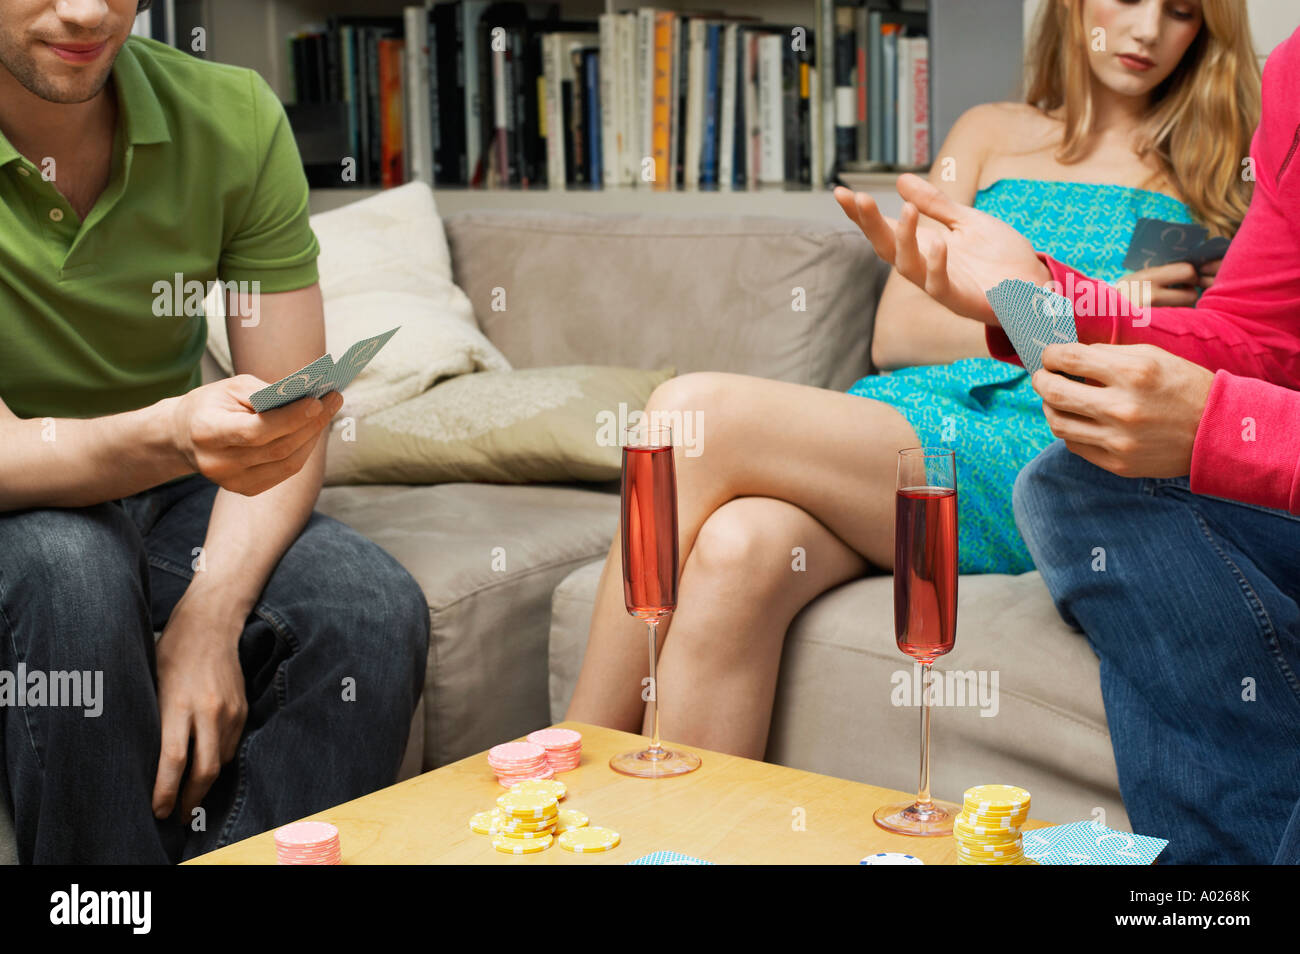 Friends Playing Cards in living room, mid section Stock Photo